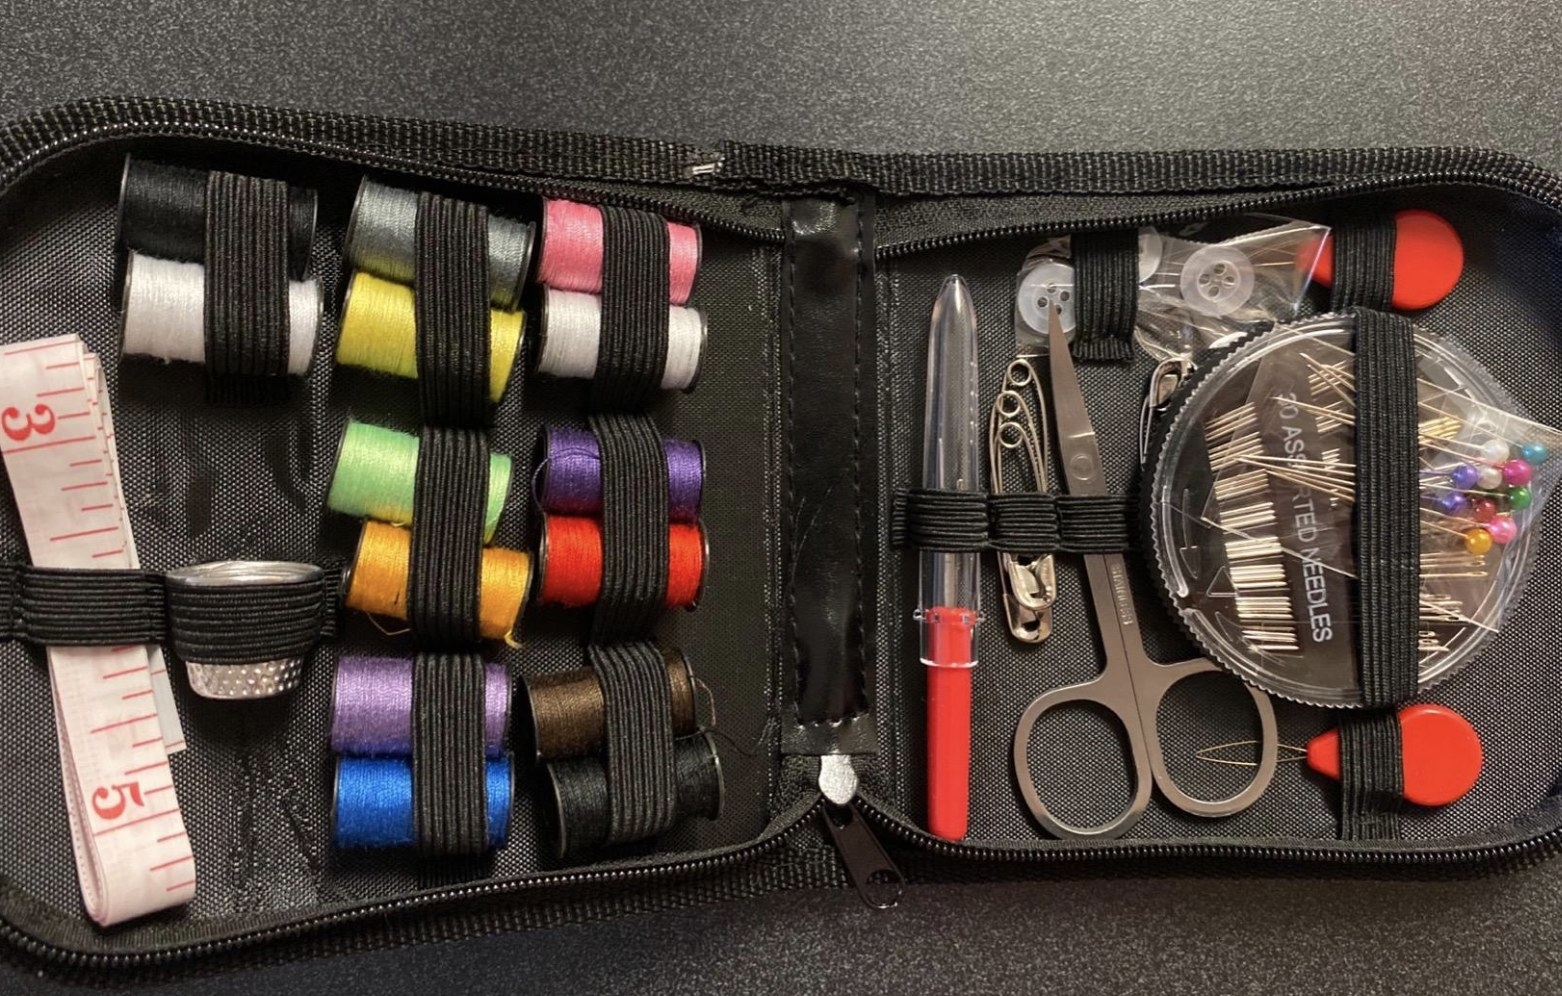 reviewer photo showing the sewing kit